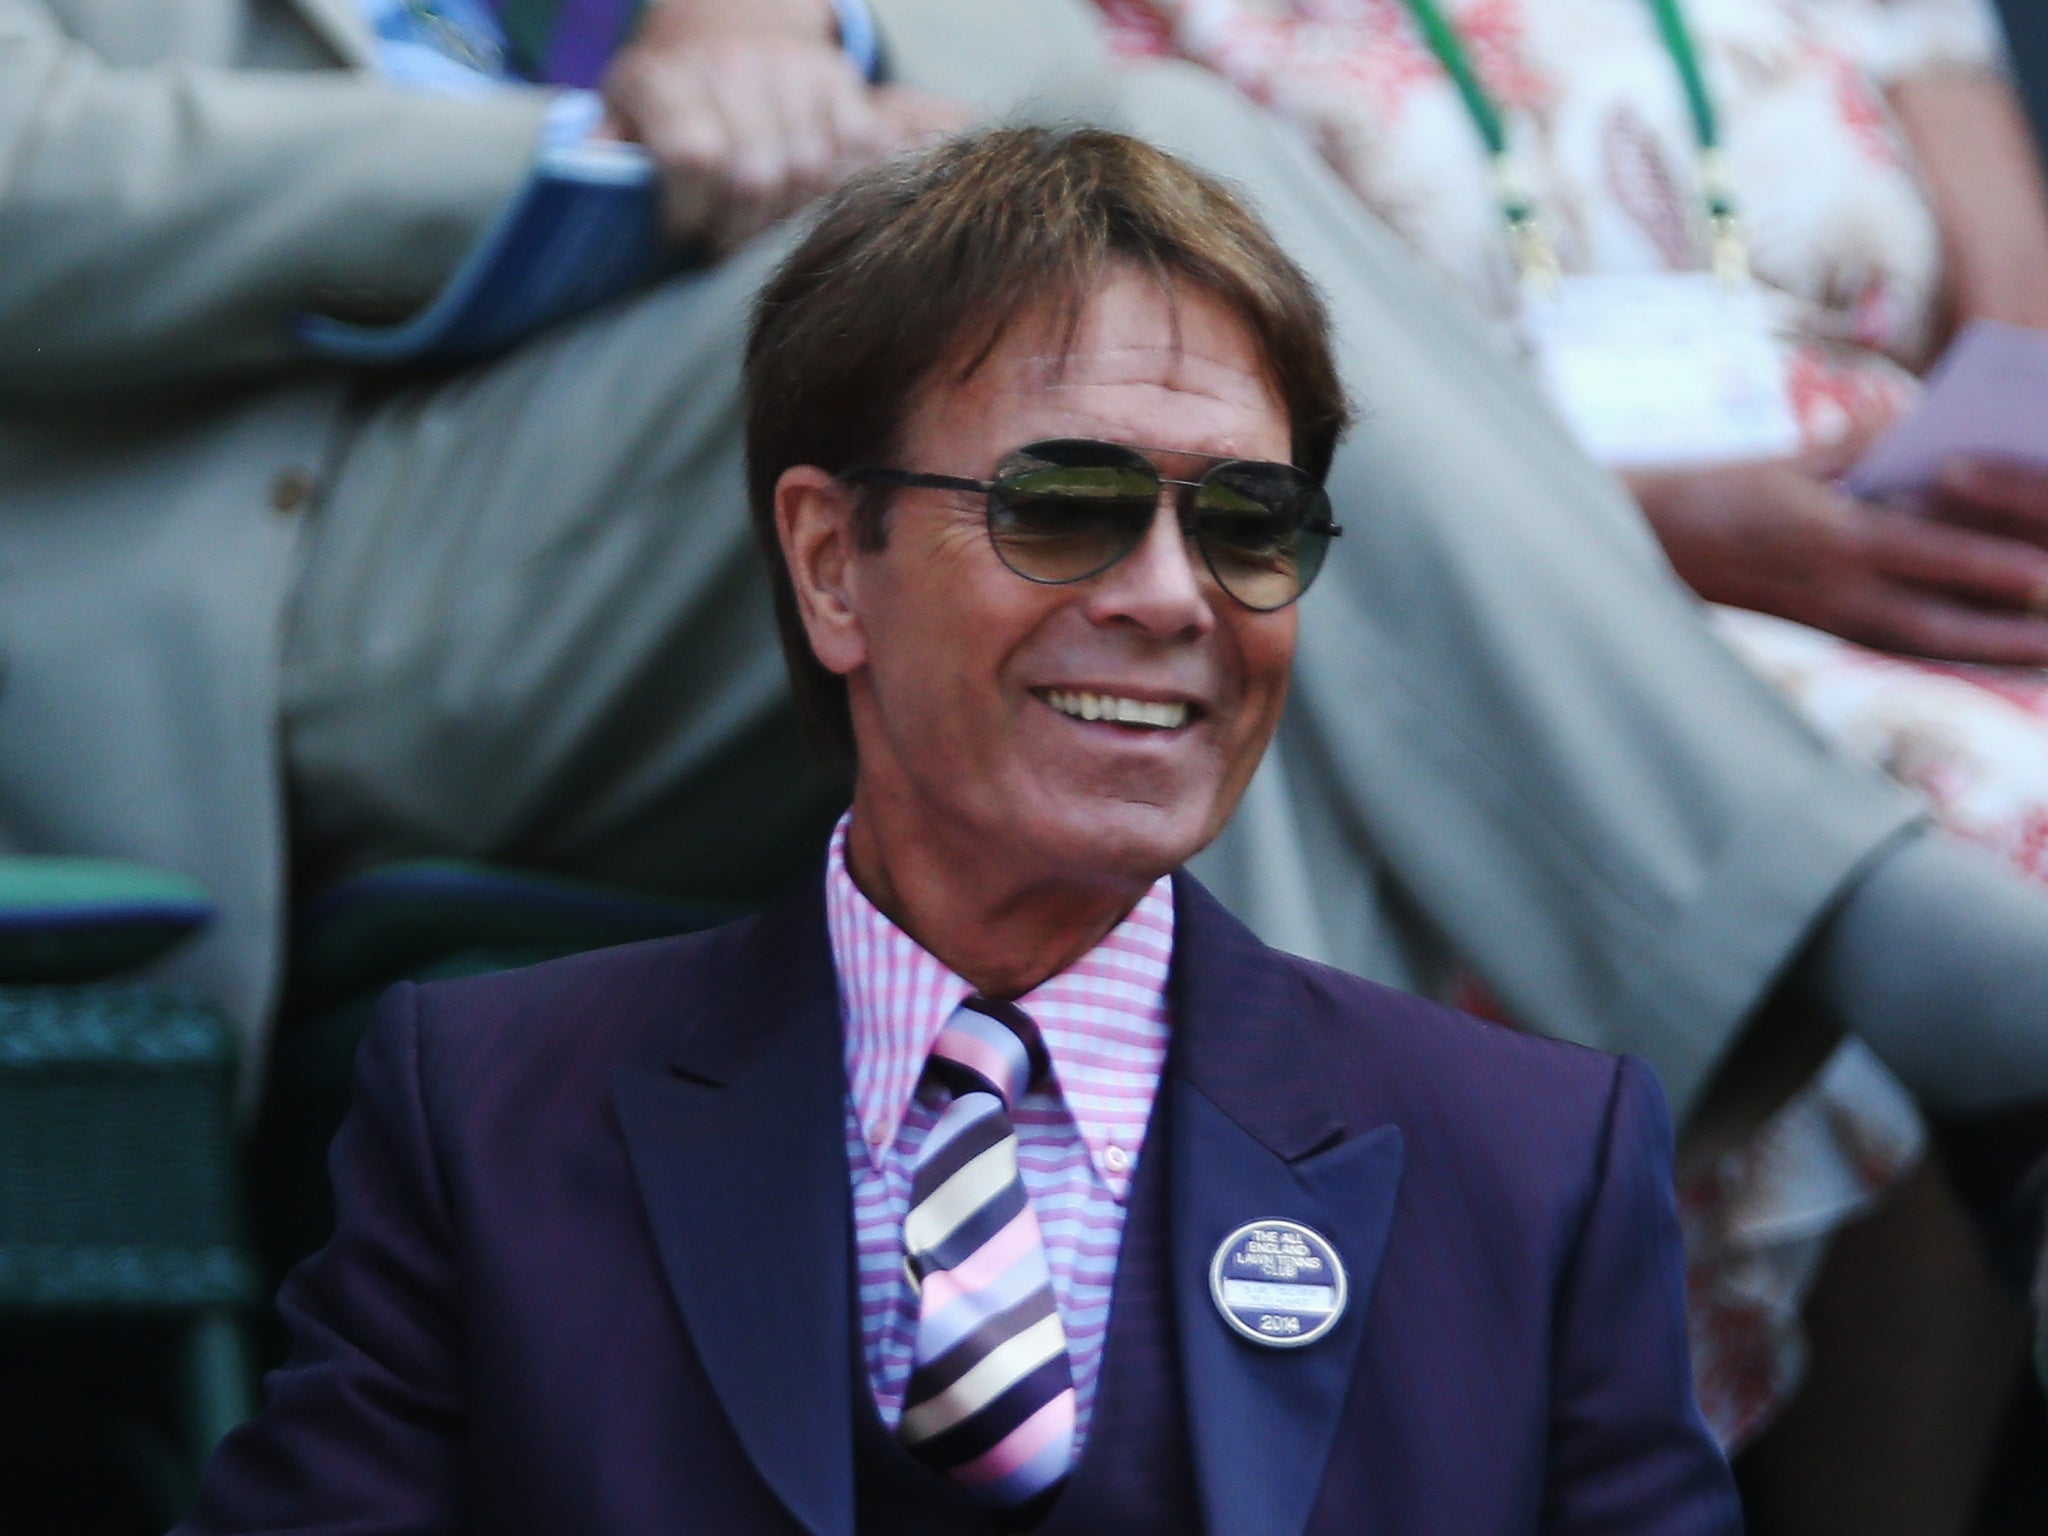 Veteran singer and actor Sir Cliff Richard has enjoyed a career spanning 50 decades, during which he has sold 250 million records world-wide.